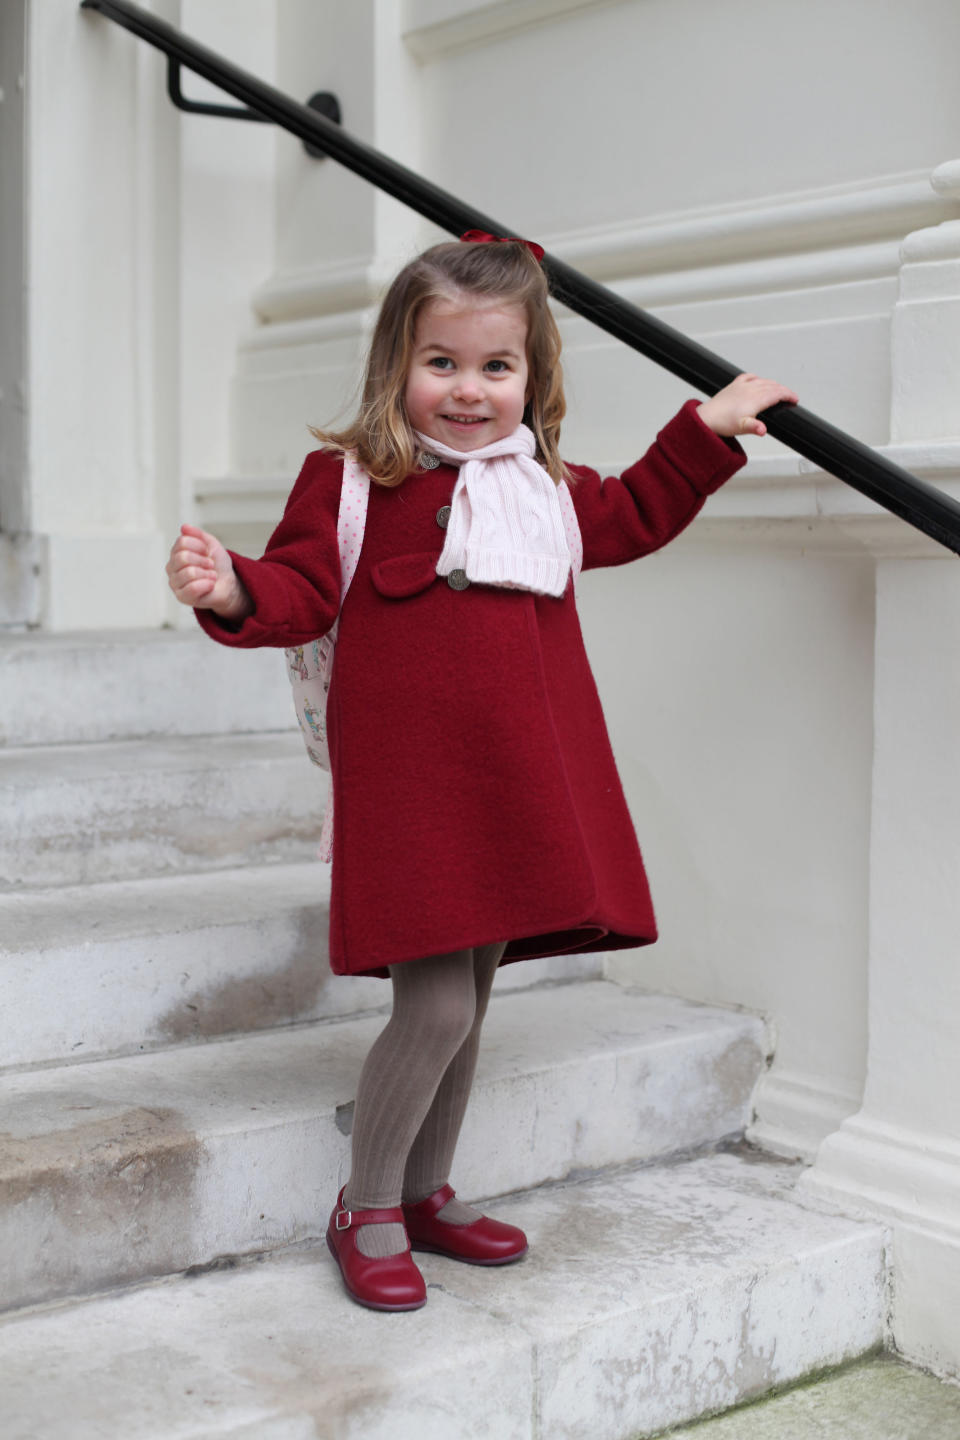 Princess Charlotte pictured on her first day of nursery in 2018. [Photo: PA]